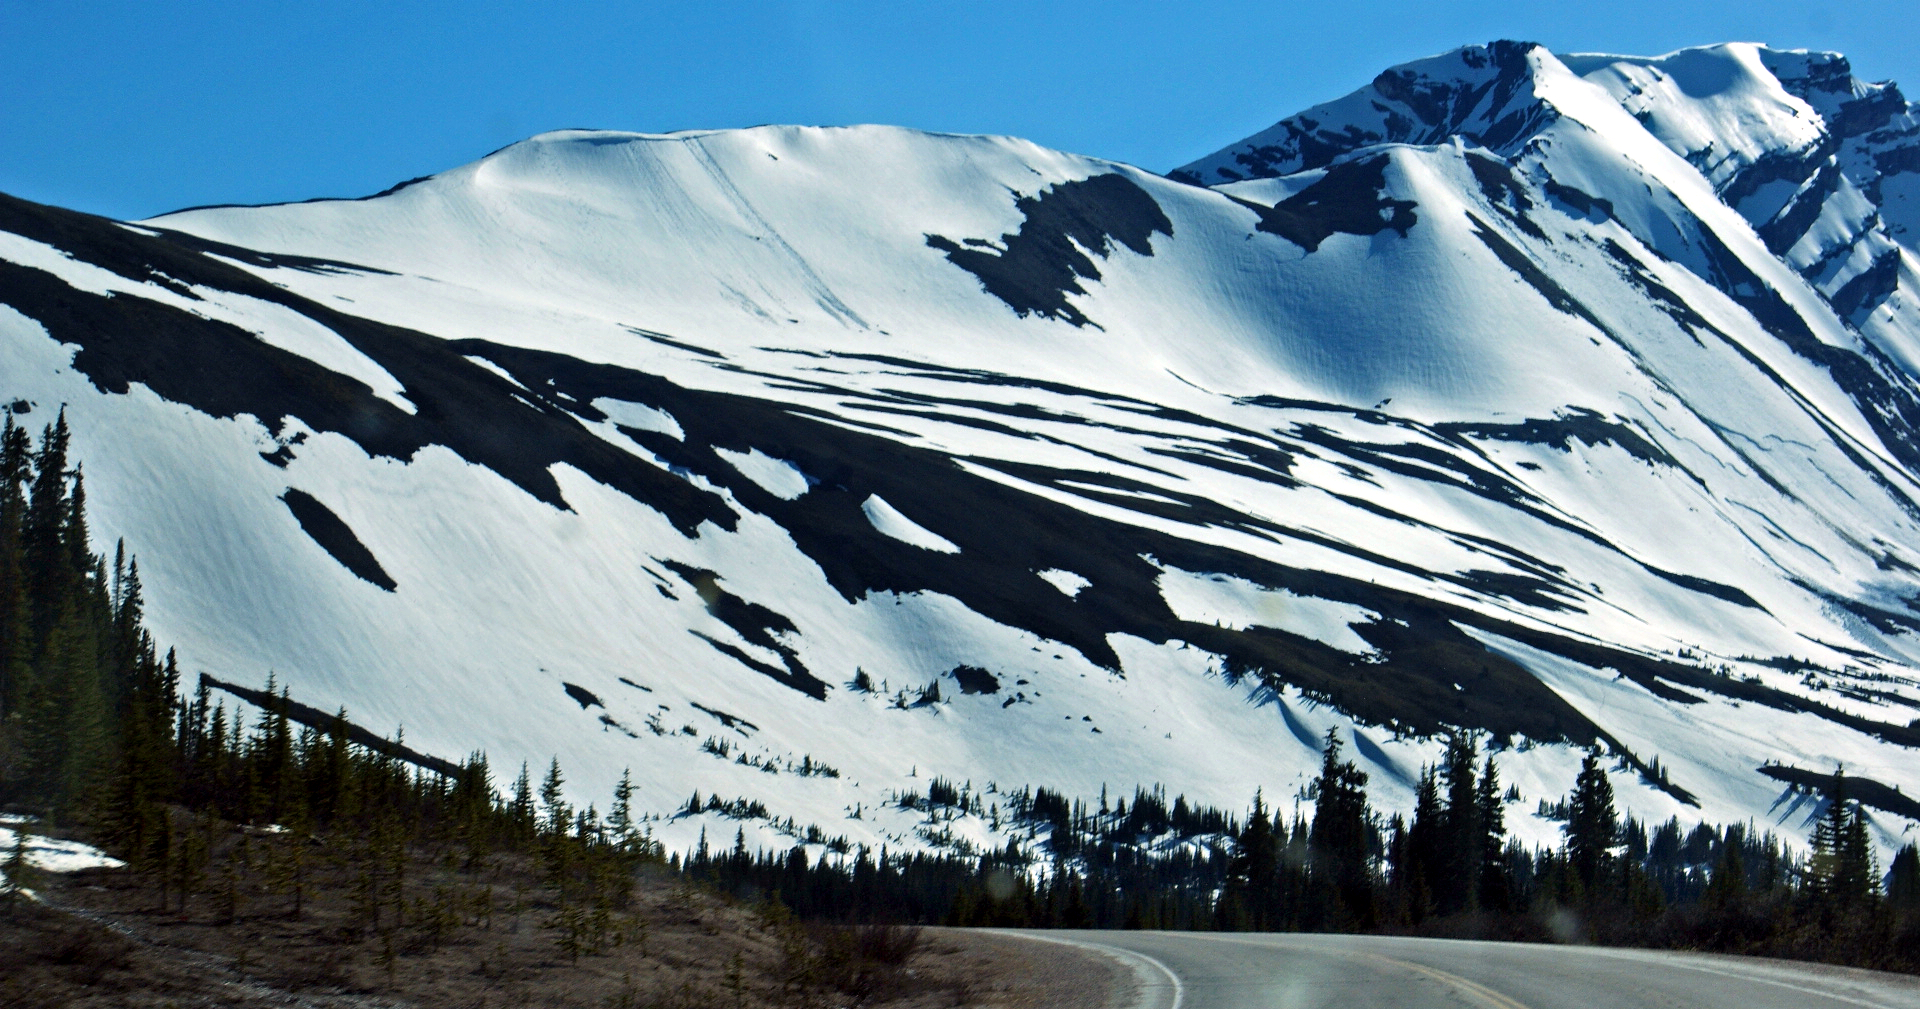 Parker Ridge from Icefields Parkway.jpg